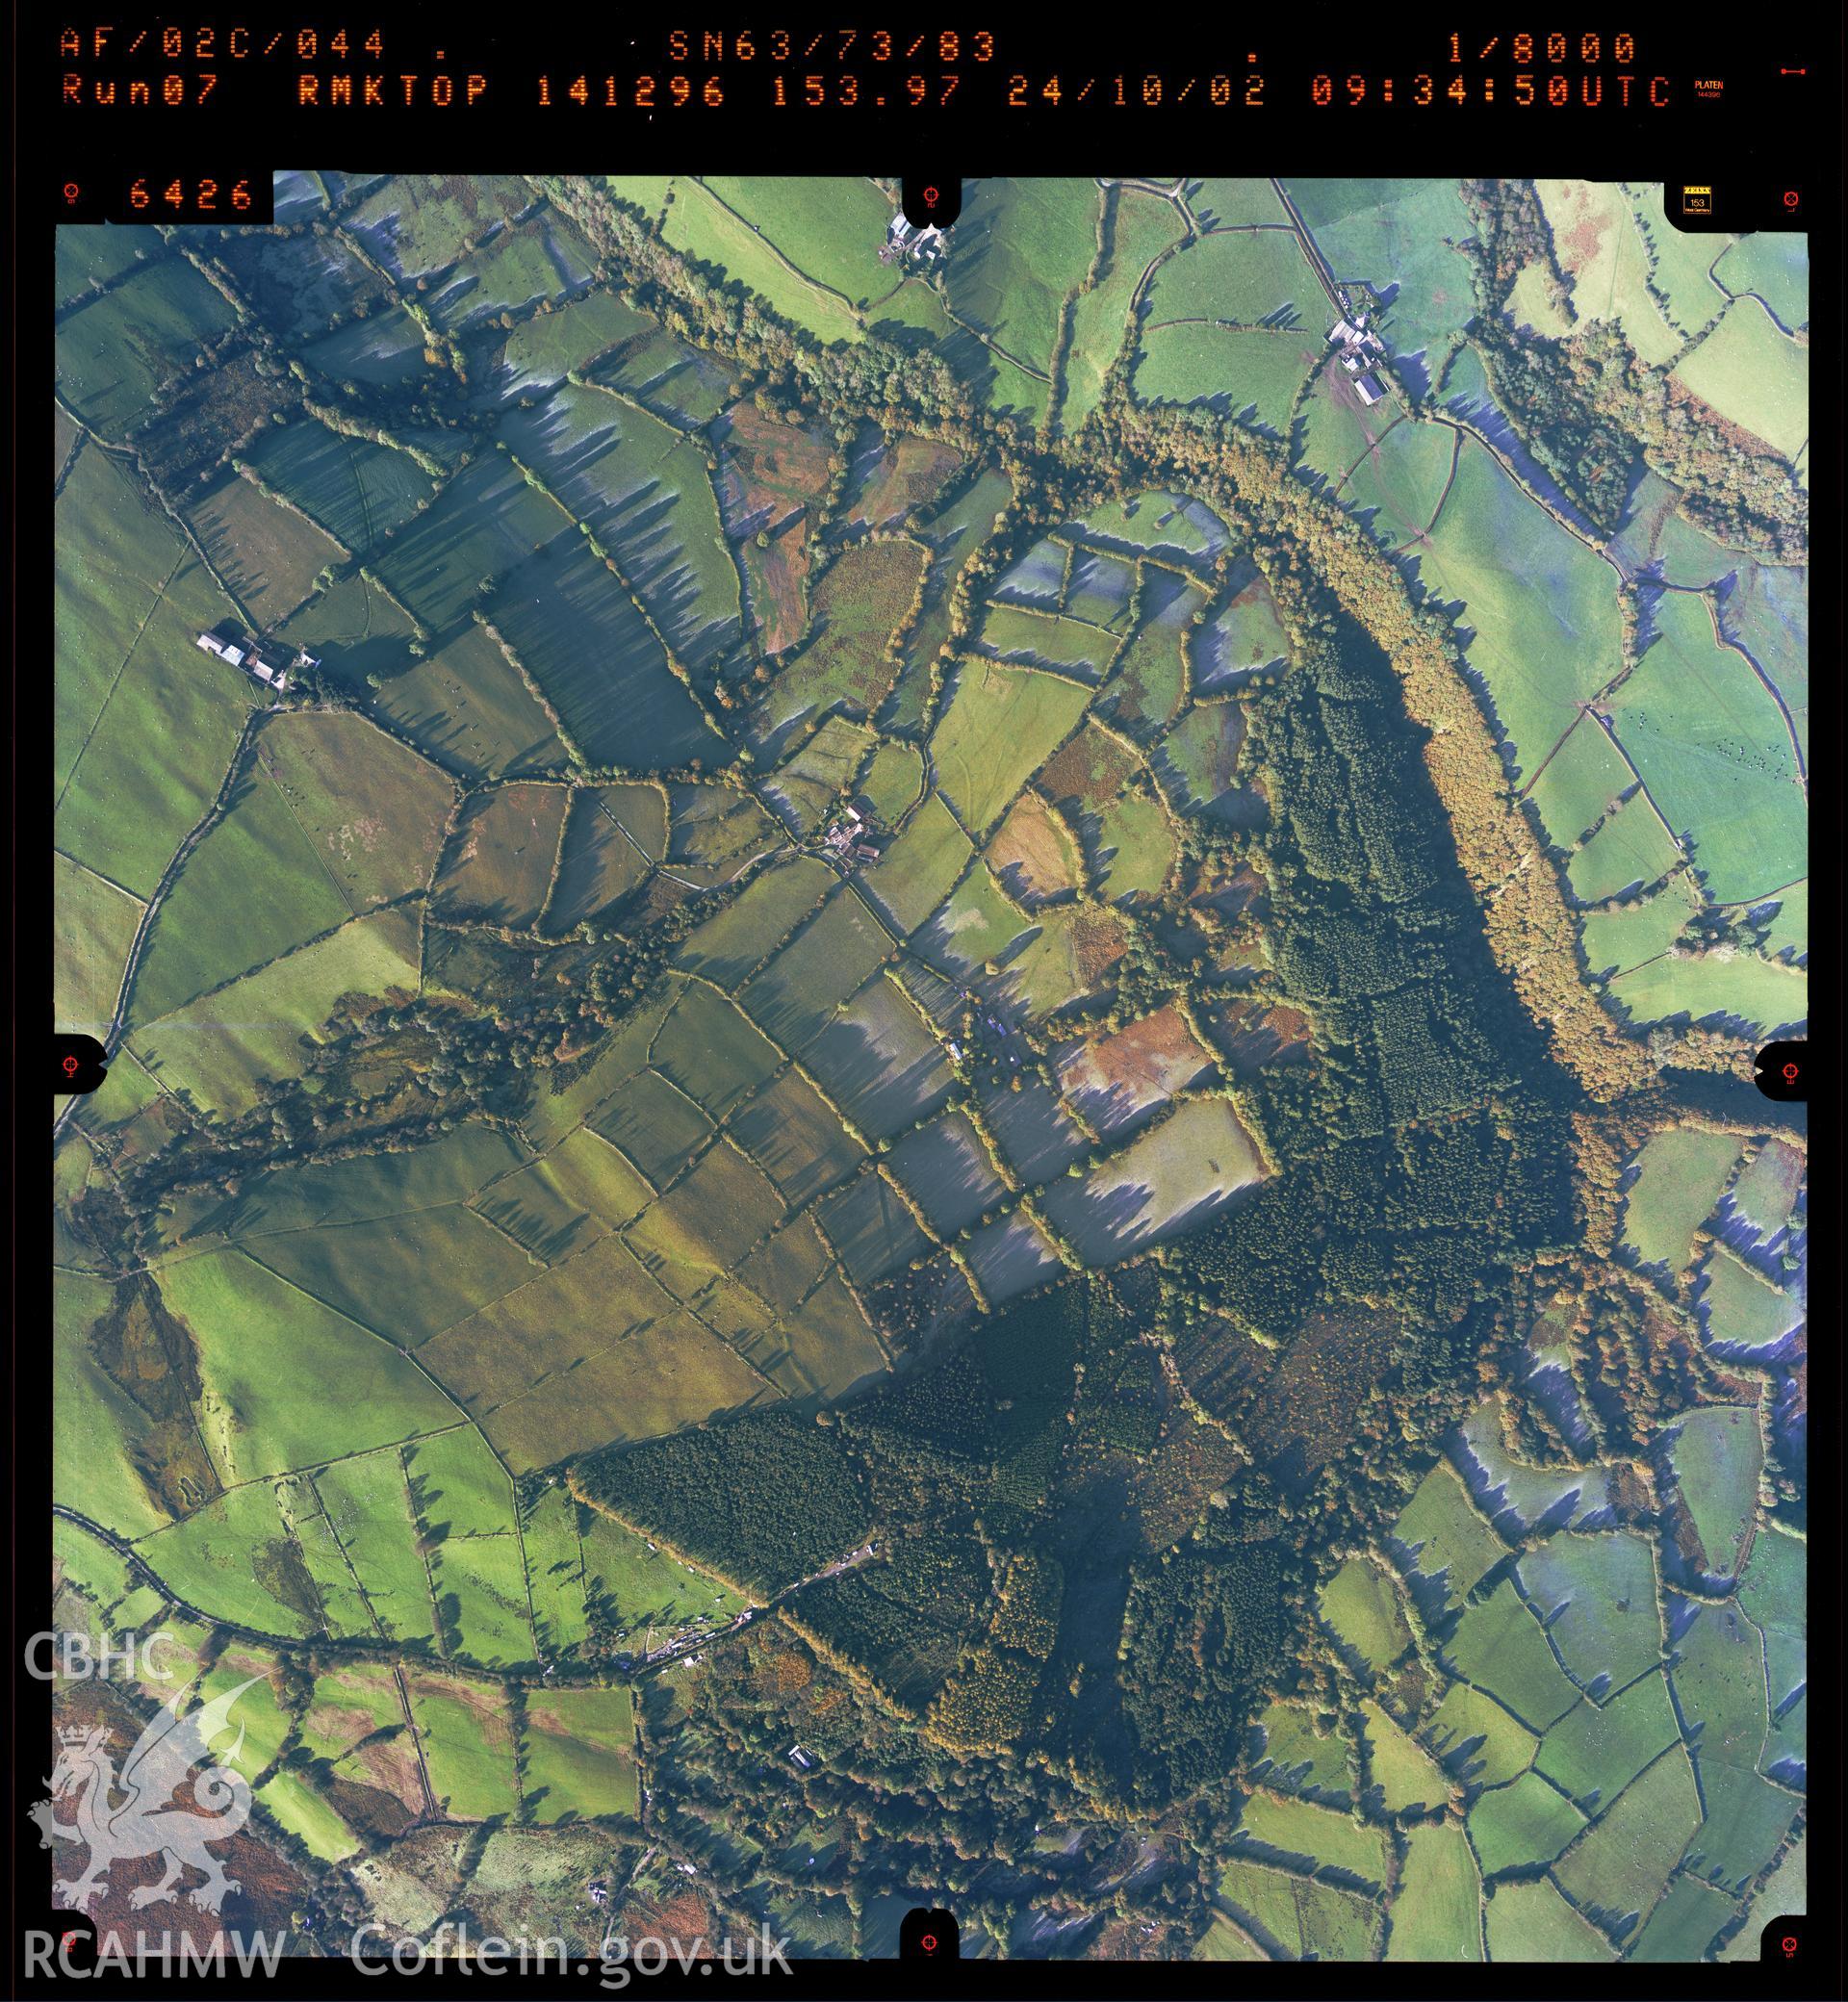 Digitized copy of a colour aerial photograph showing the Mynydd Figyn area, taken by Ordnance Survey, 2002.